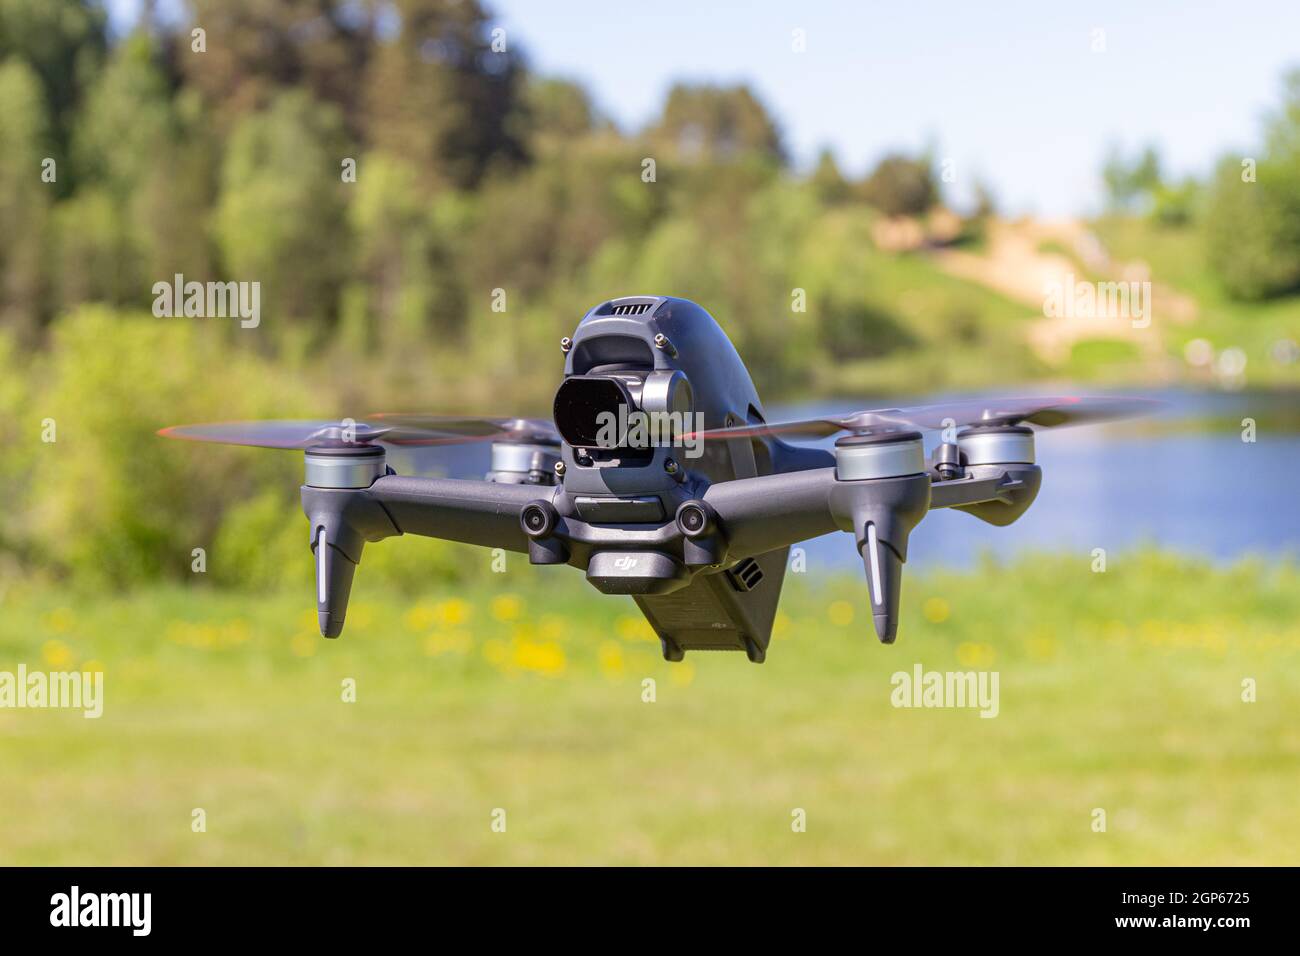 Moscow, 31 MAY 2021 : A new DJI FPV drone is flying during a sunny day on grass in beckground. Top Front View. Headless Quadcopter with Digital 4K 60 Stock Photo